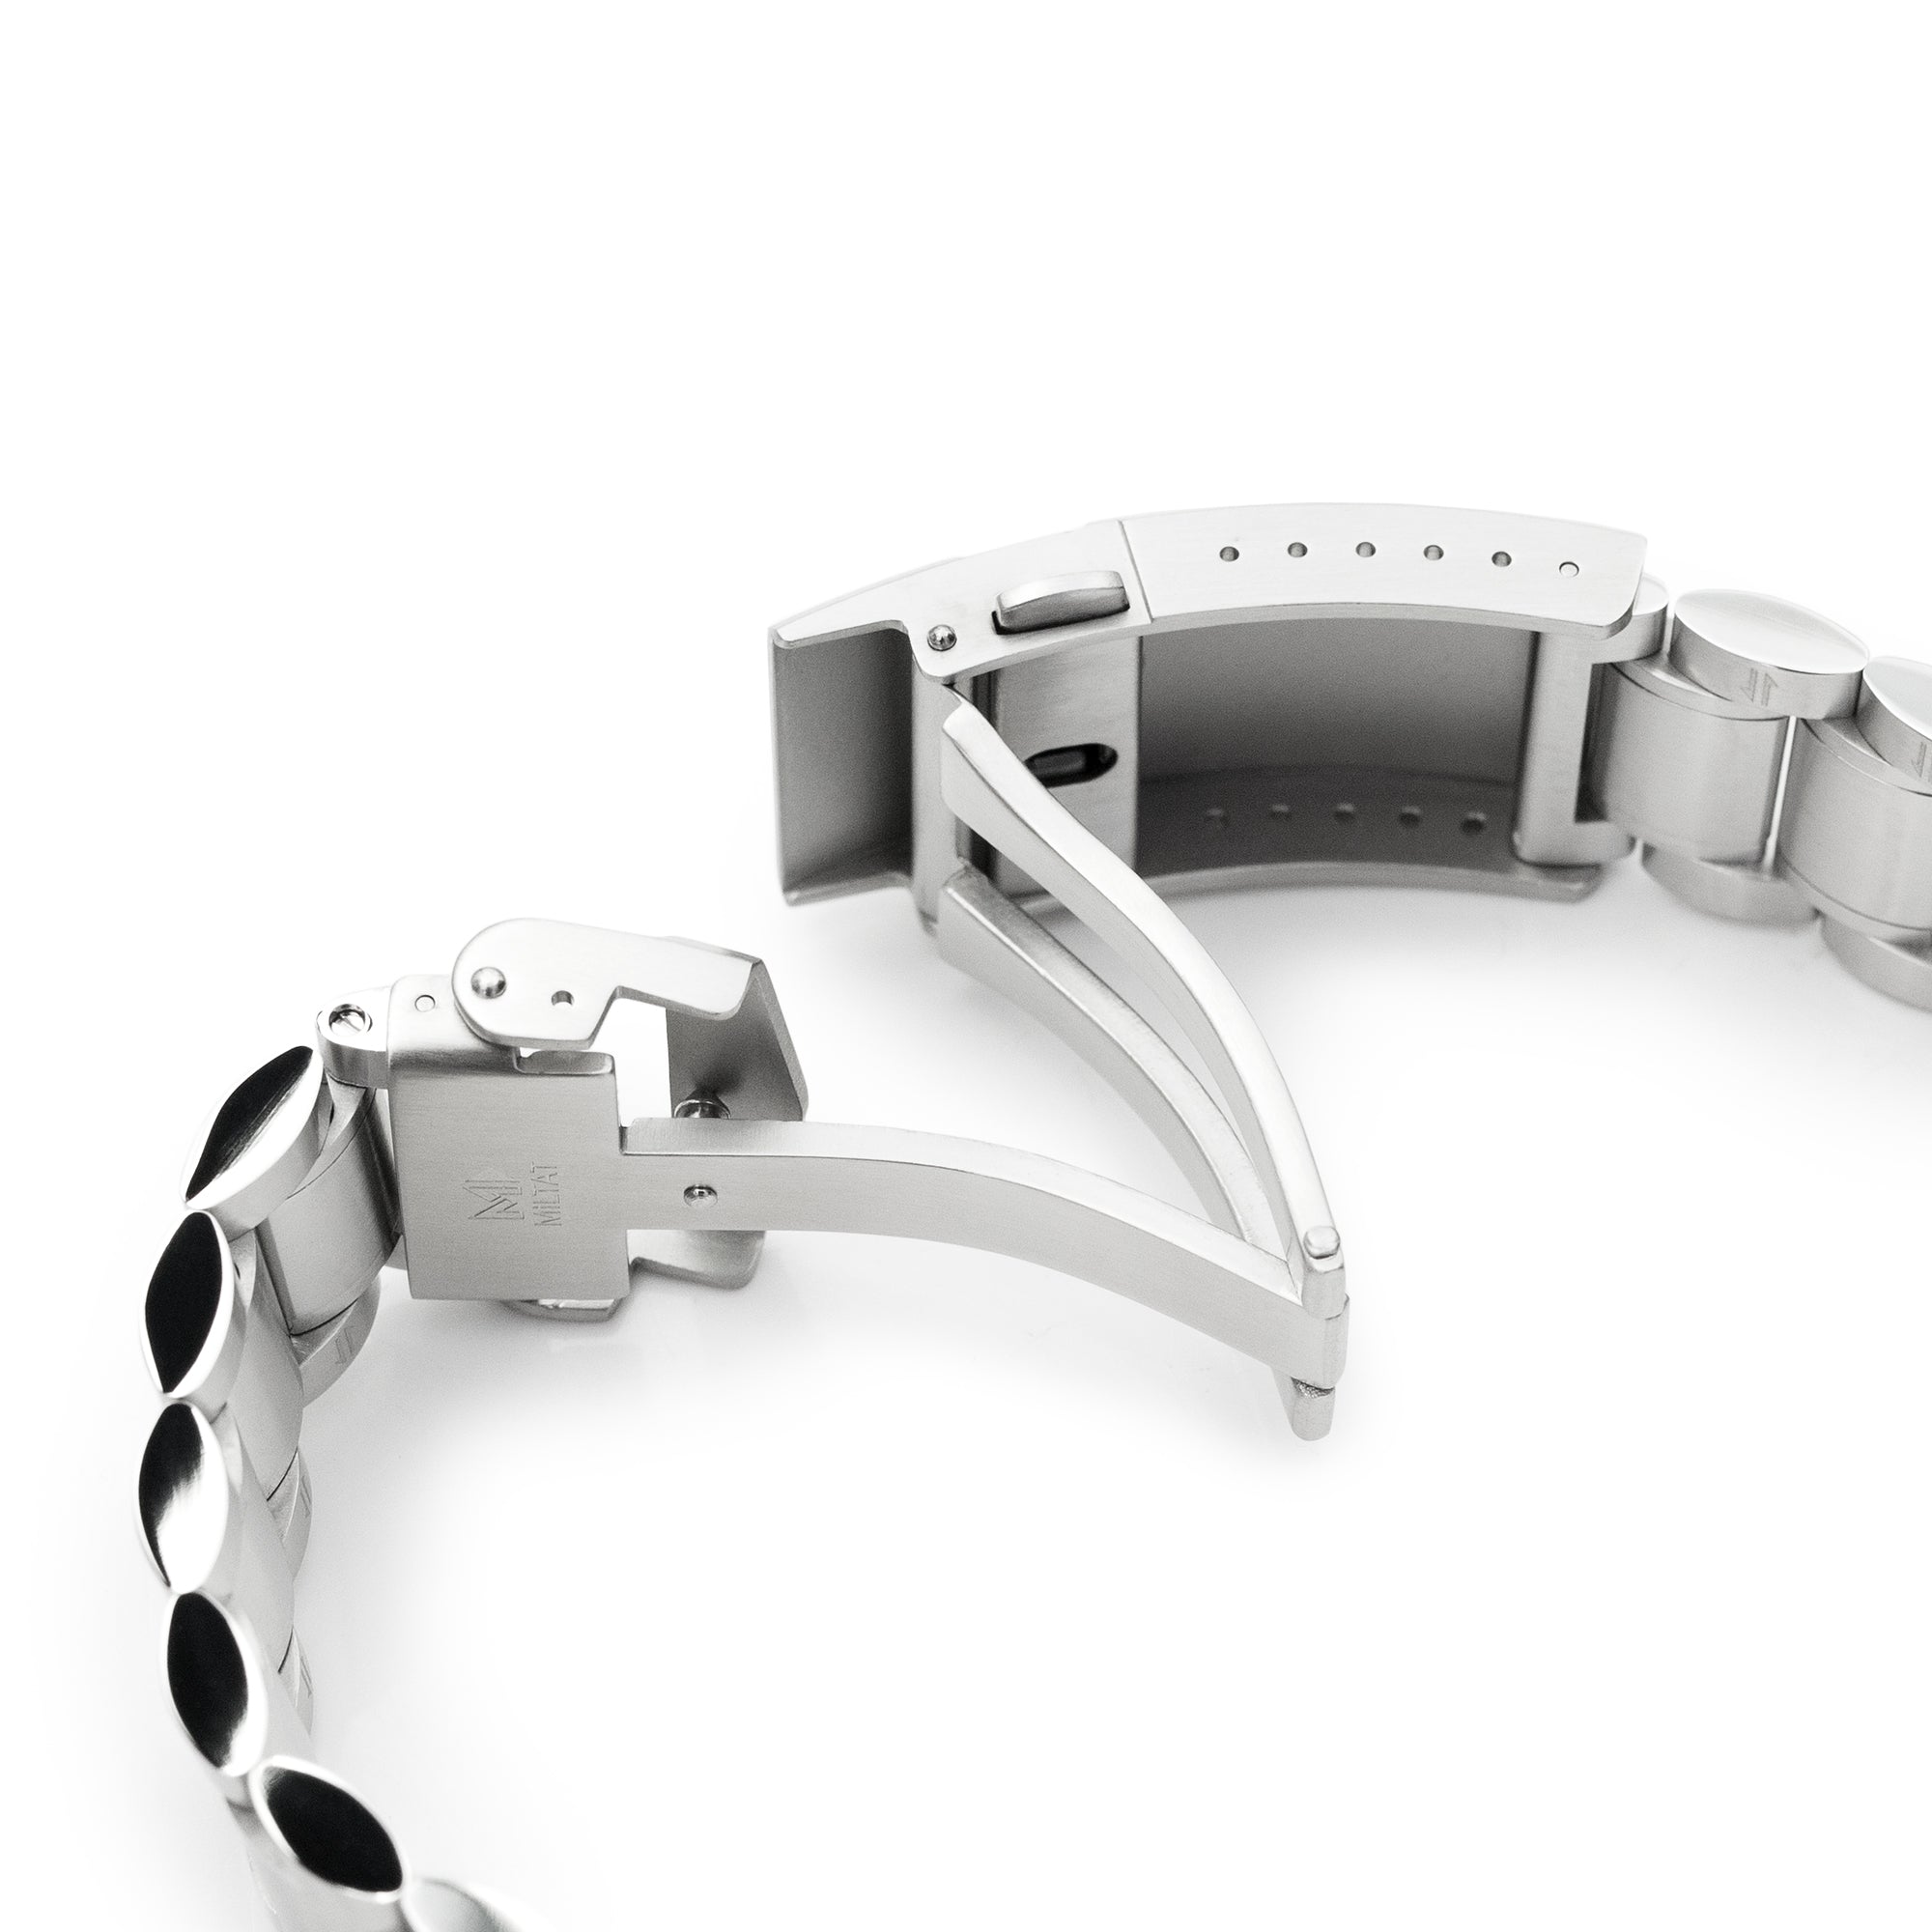 Entwine (PT) QR for Straight End Brushed and Polished Strapcode Watch Bands